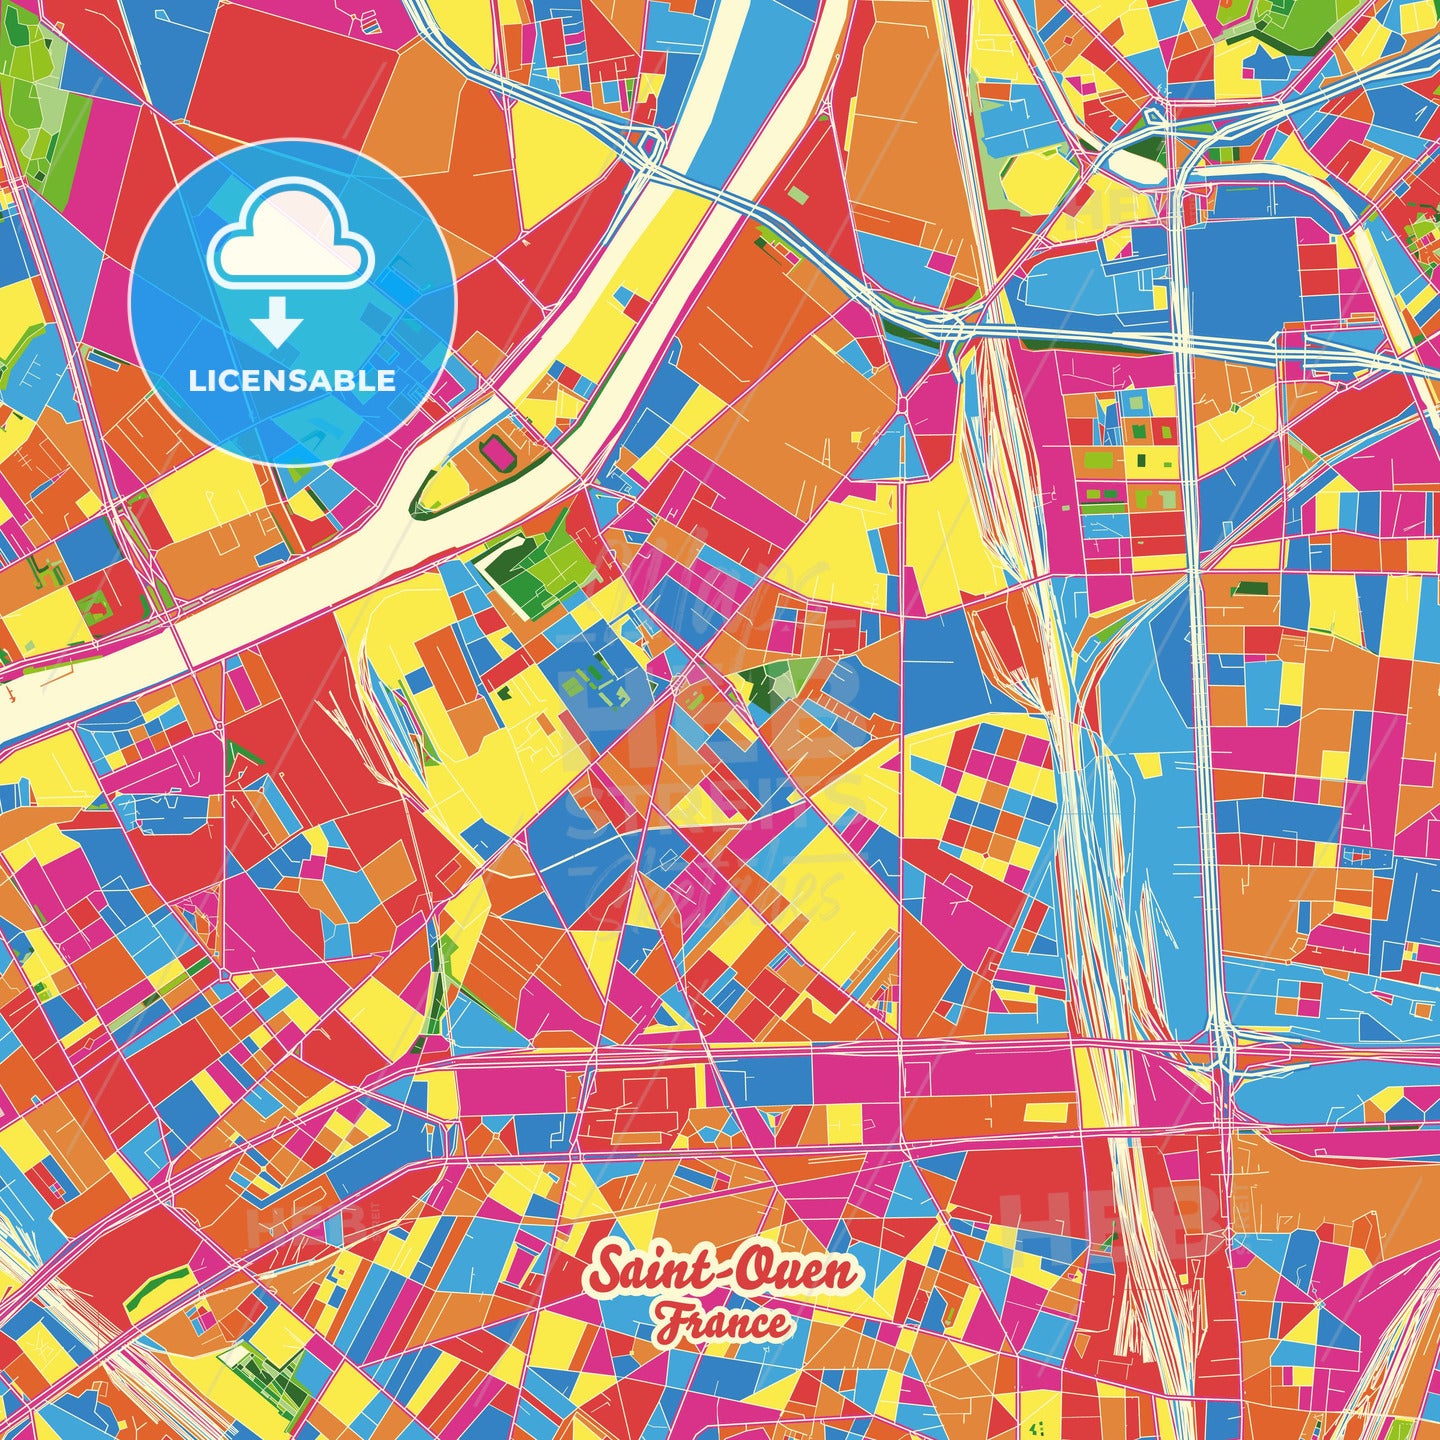 Saint-Ouen, France Crazy Colorful Street Map Poster Template - HEBSTREITS Sketches